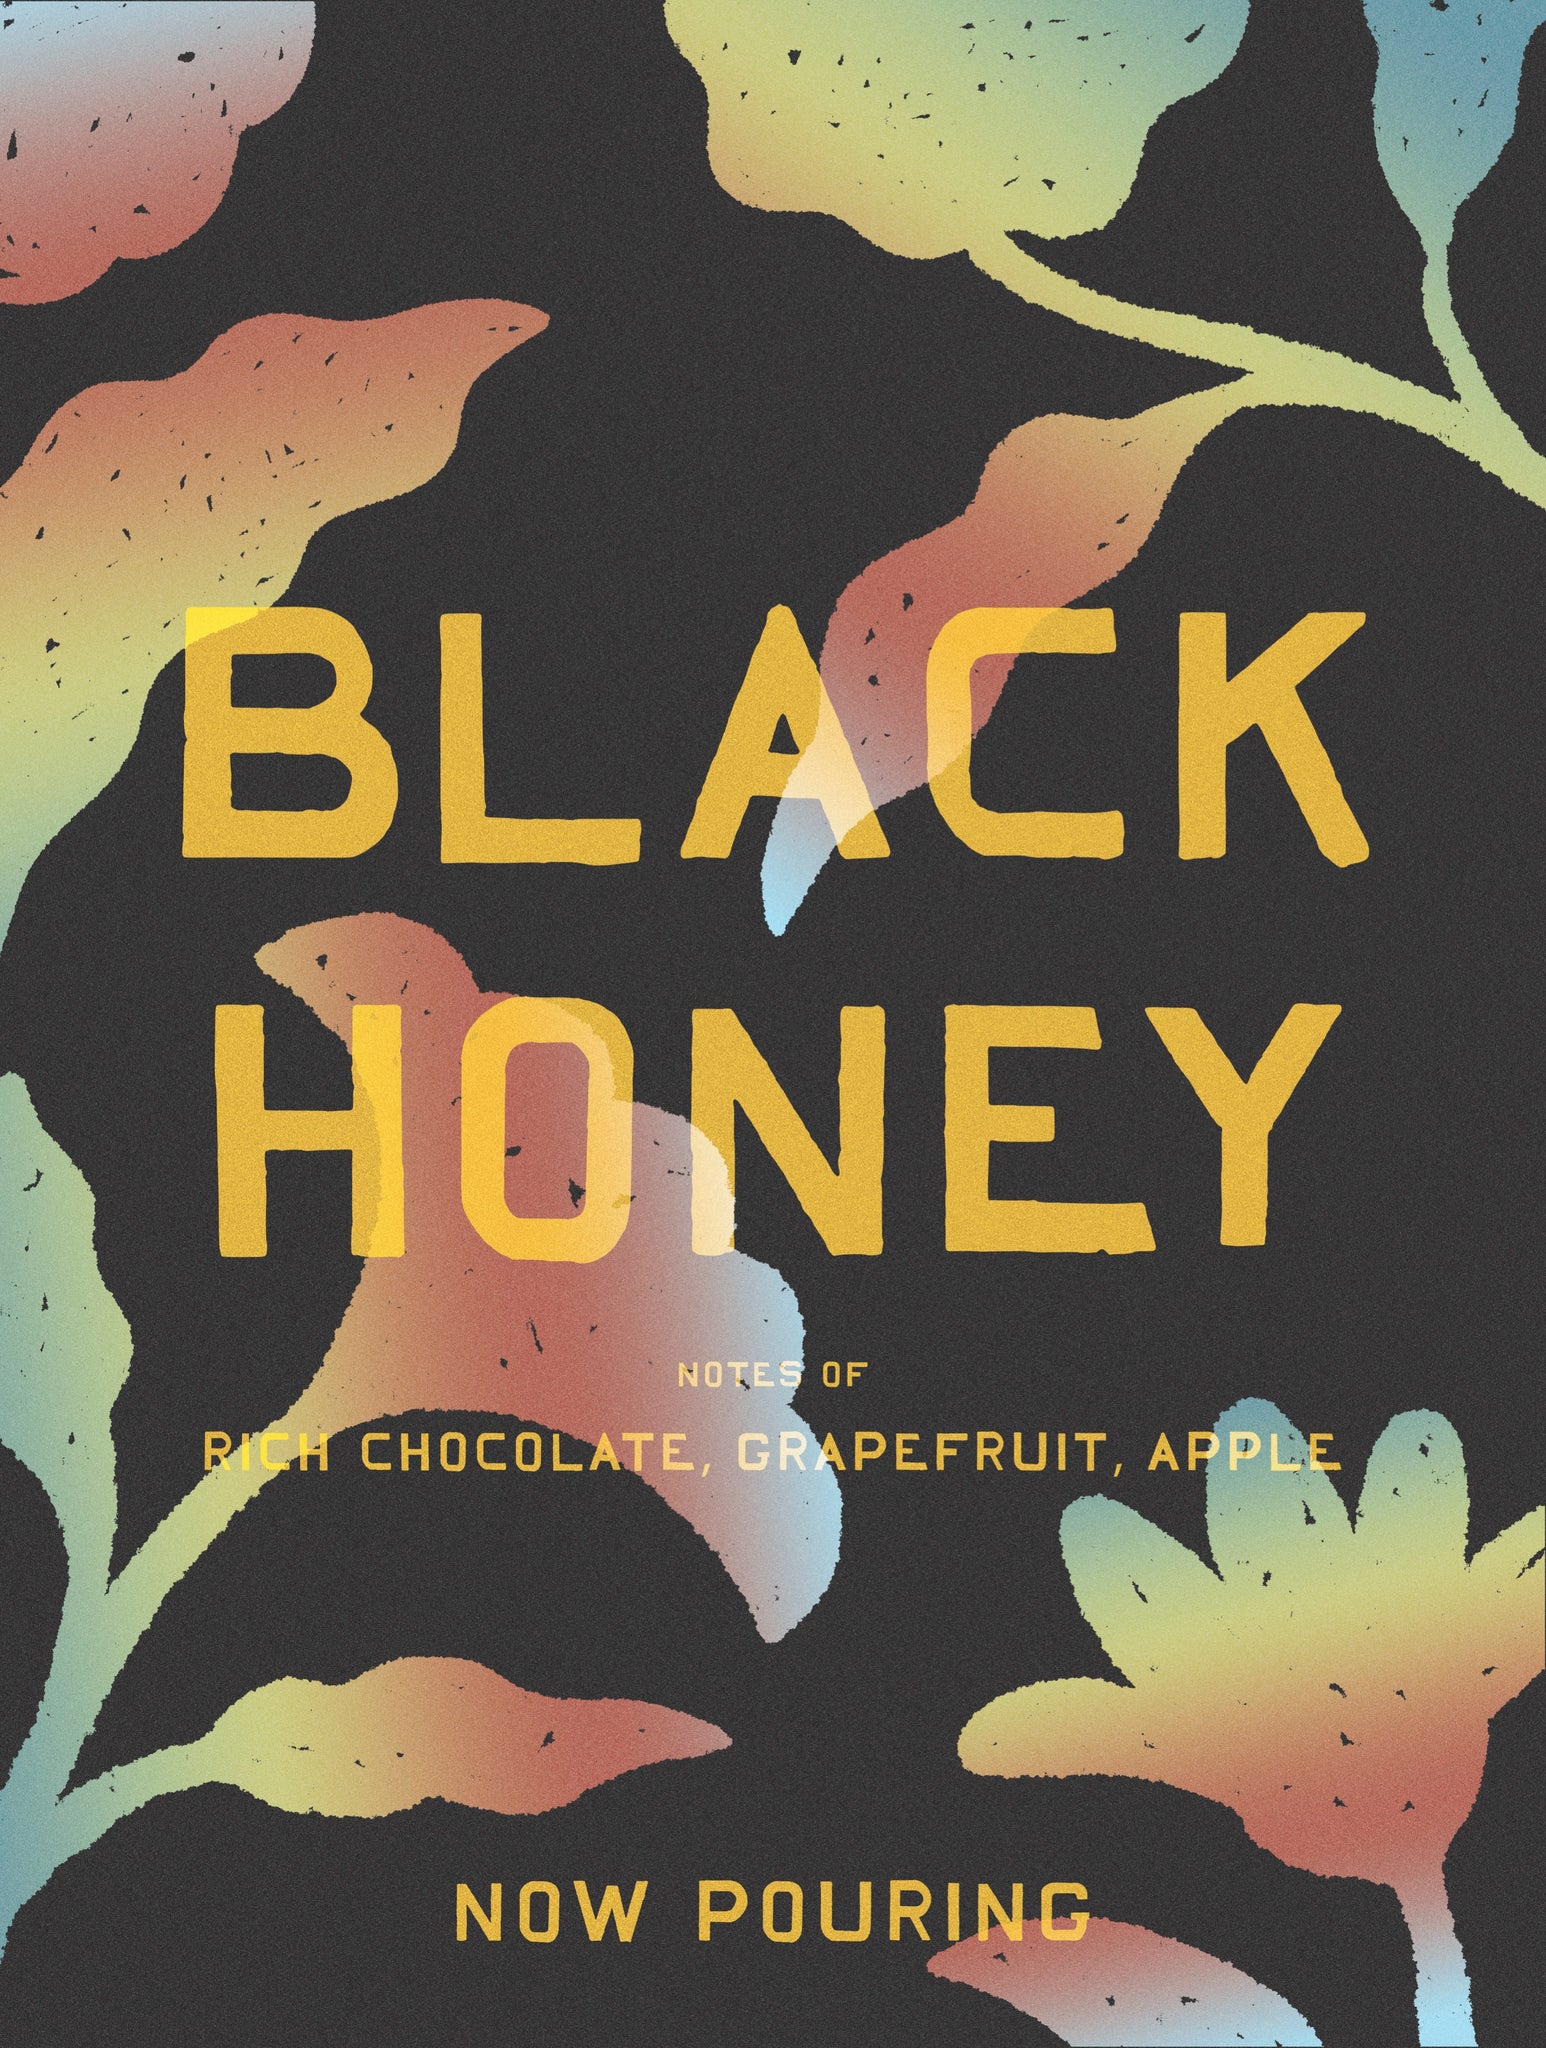 Back again with something new and exciting: Cafe Rica - Black Honey